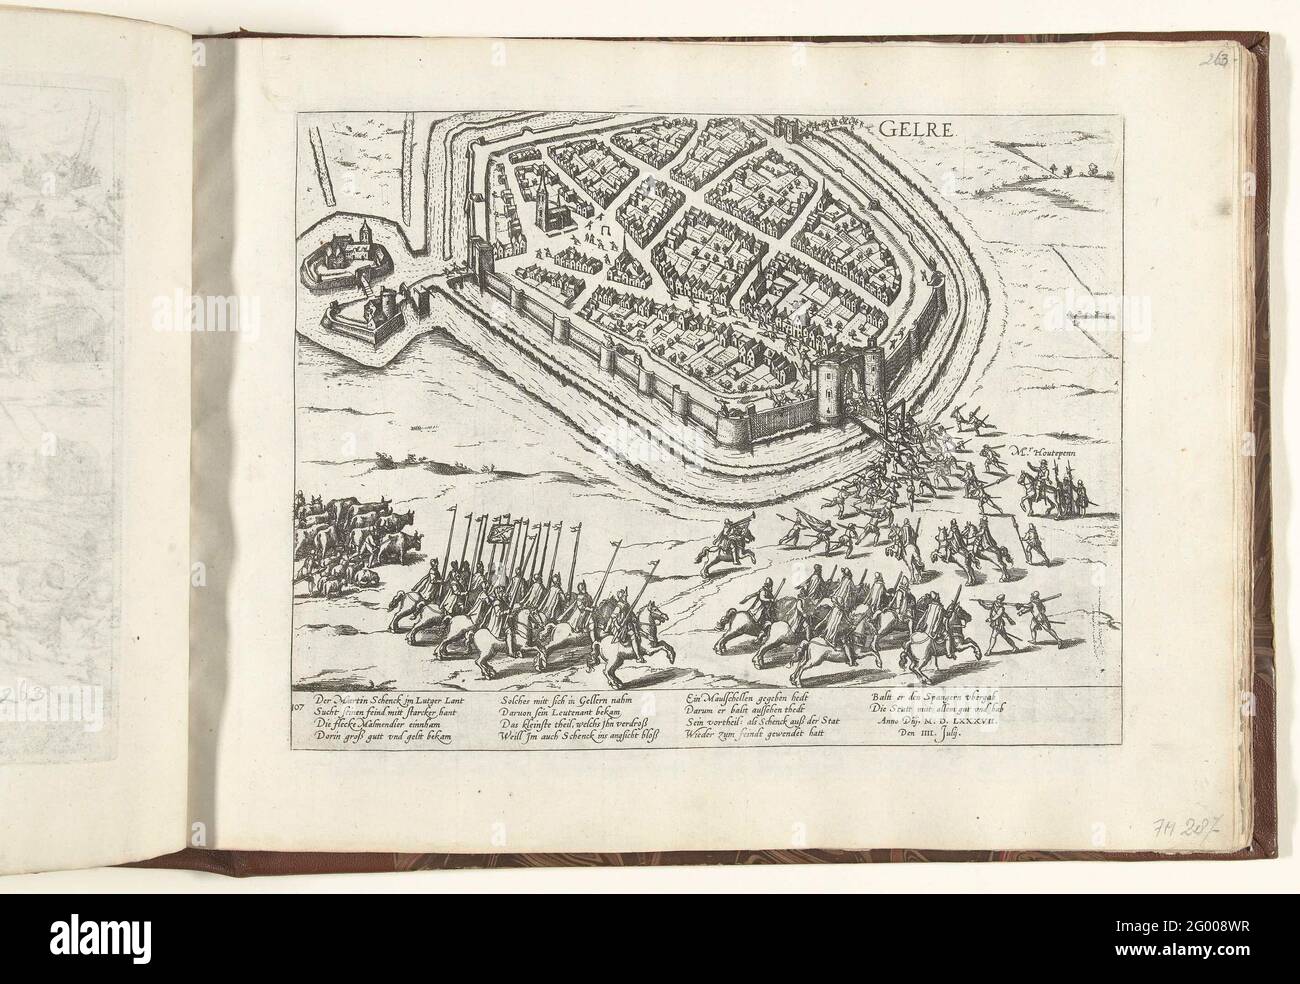 Geldern passes through betrayal to the Spaniards, 1587; Series 9: Dutch and German events, 1583-1587. The city of Gelre, now Geldern, passes through betrayal to the Spaniards among Haulteepenne, July 4, 1587. The Spanish soldiers enter the city through the gate. With caption of 14 lines in German. Numbered: 107. Stock Photo